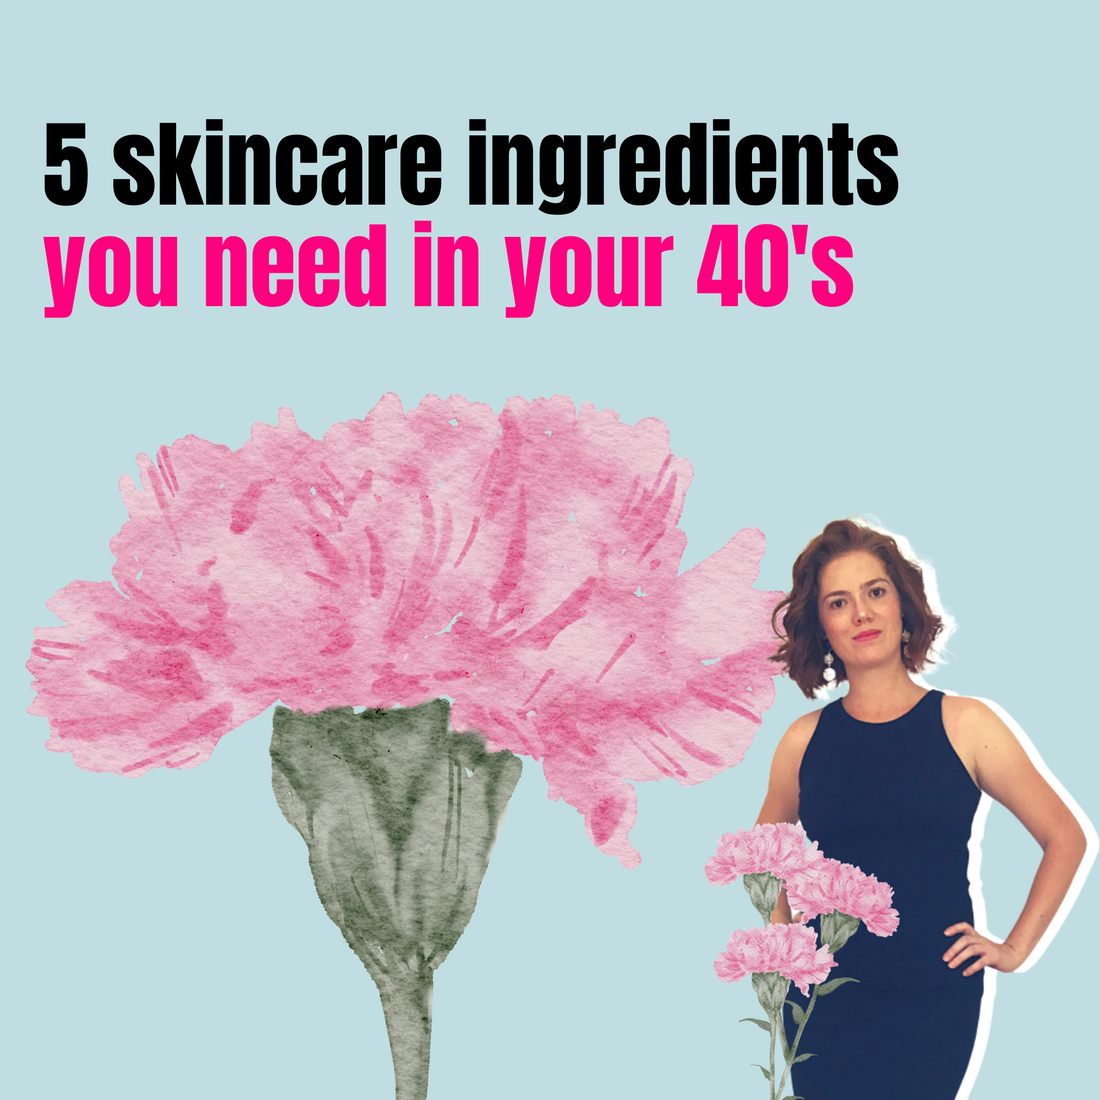 5 Skincare Ingredients you need in your 40's